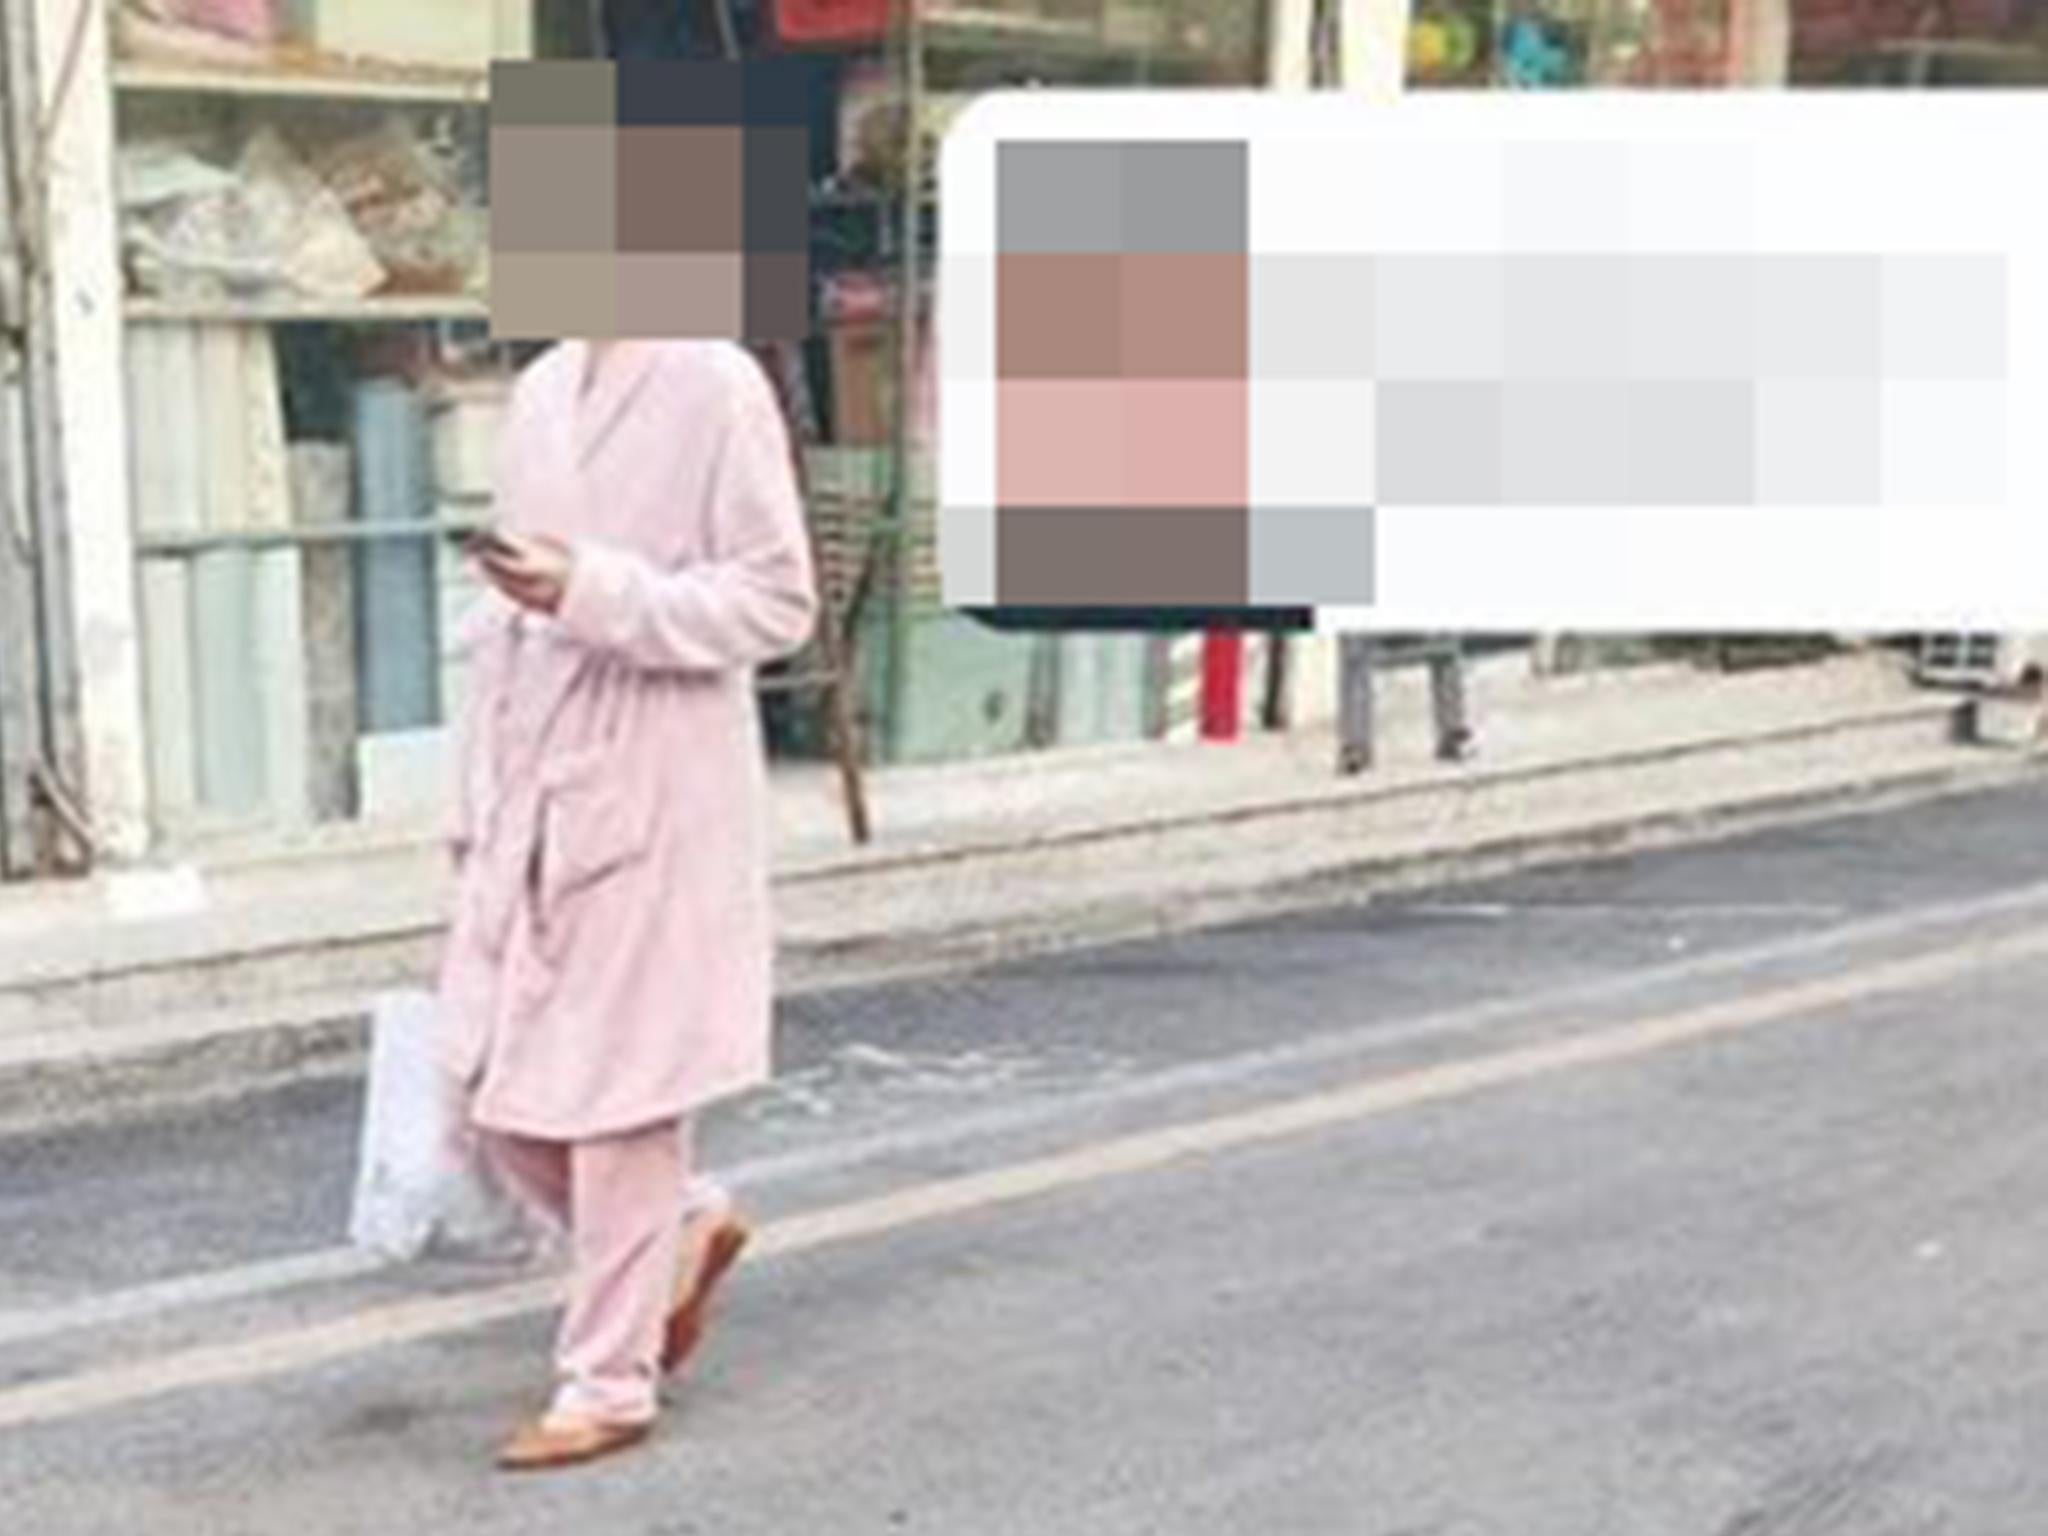 Chinese city apologises after shaming people for wearing pyjamas in public The Independent The Independent image